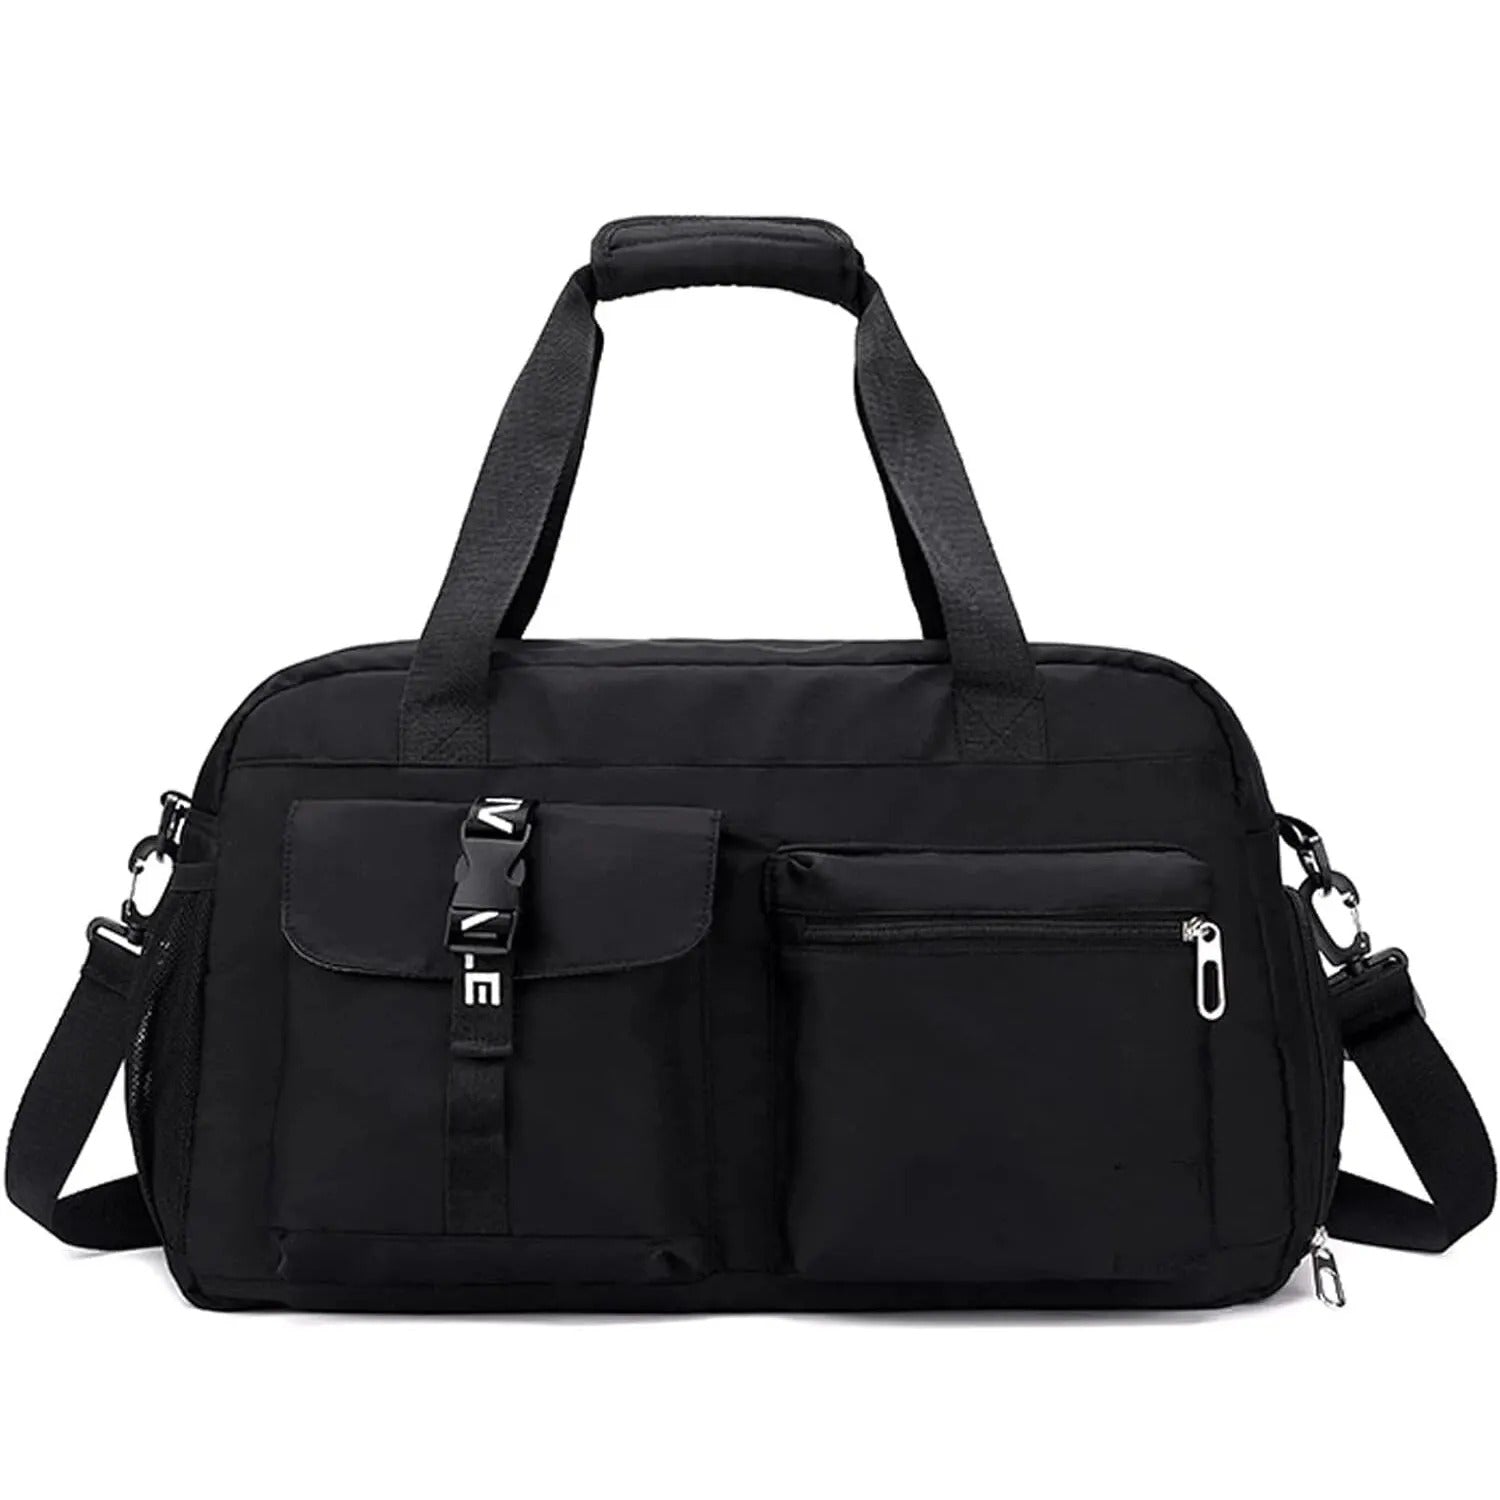 Gym Backpack With Shoe Storage - Black